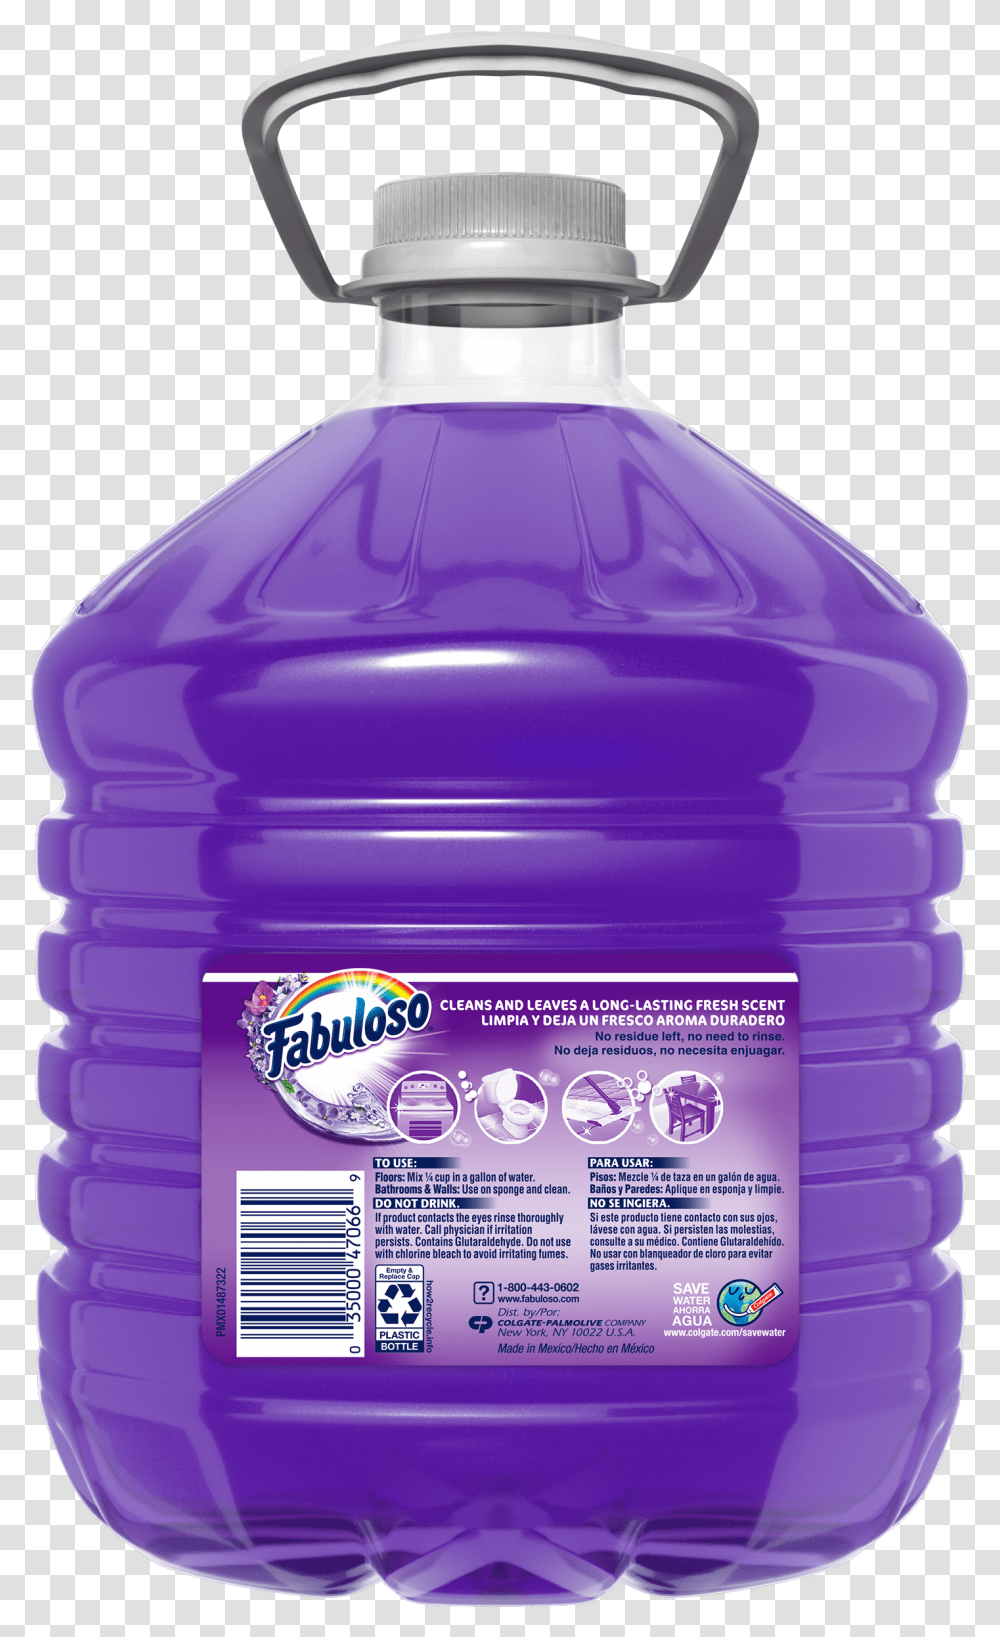 Bottle And Vectors For Free Fabuloso, Liquor, Alcohol, Beverage, Label Transparent Png